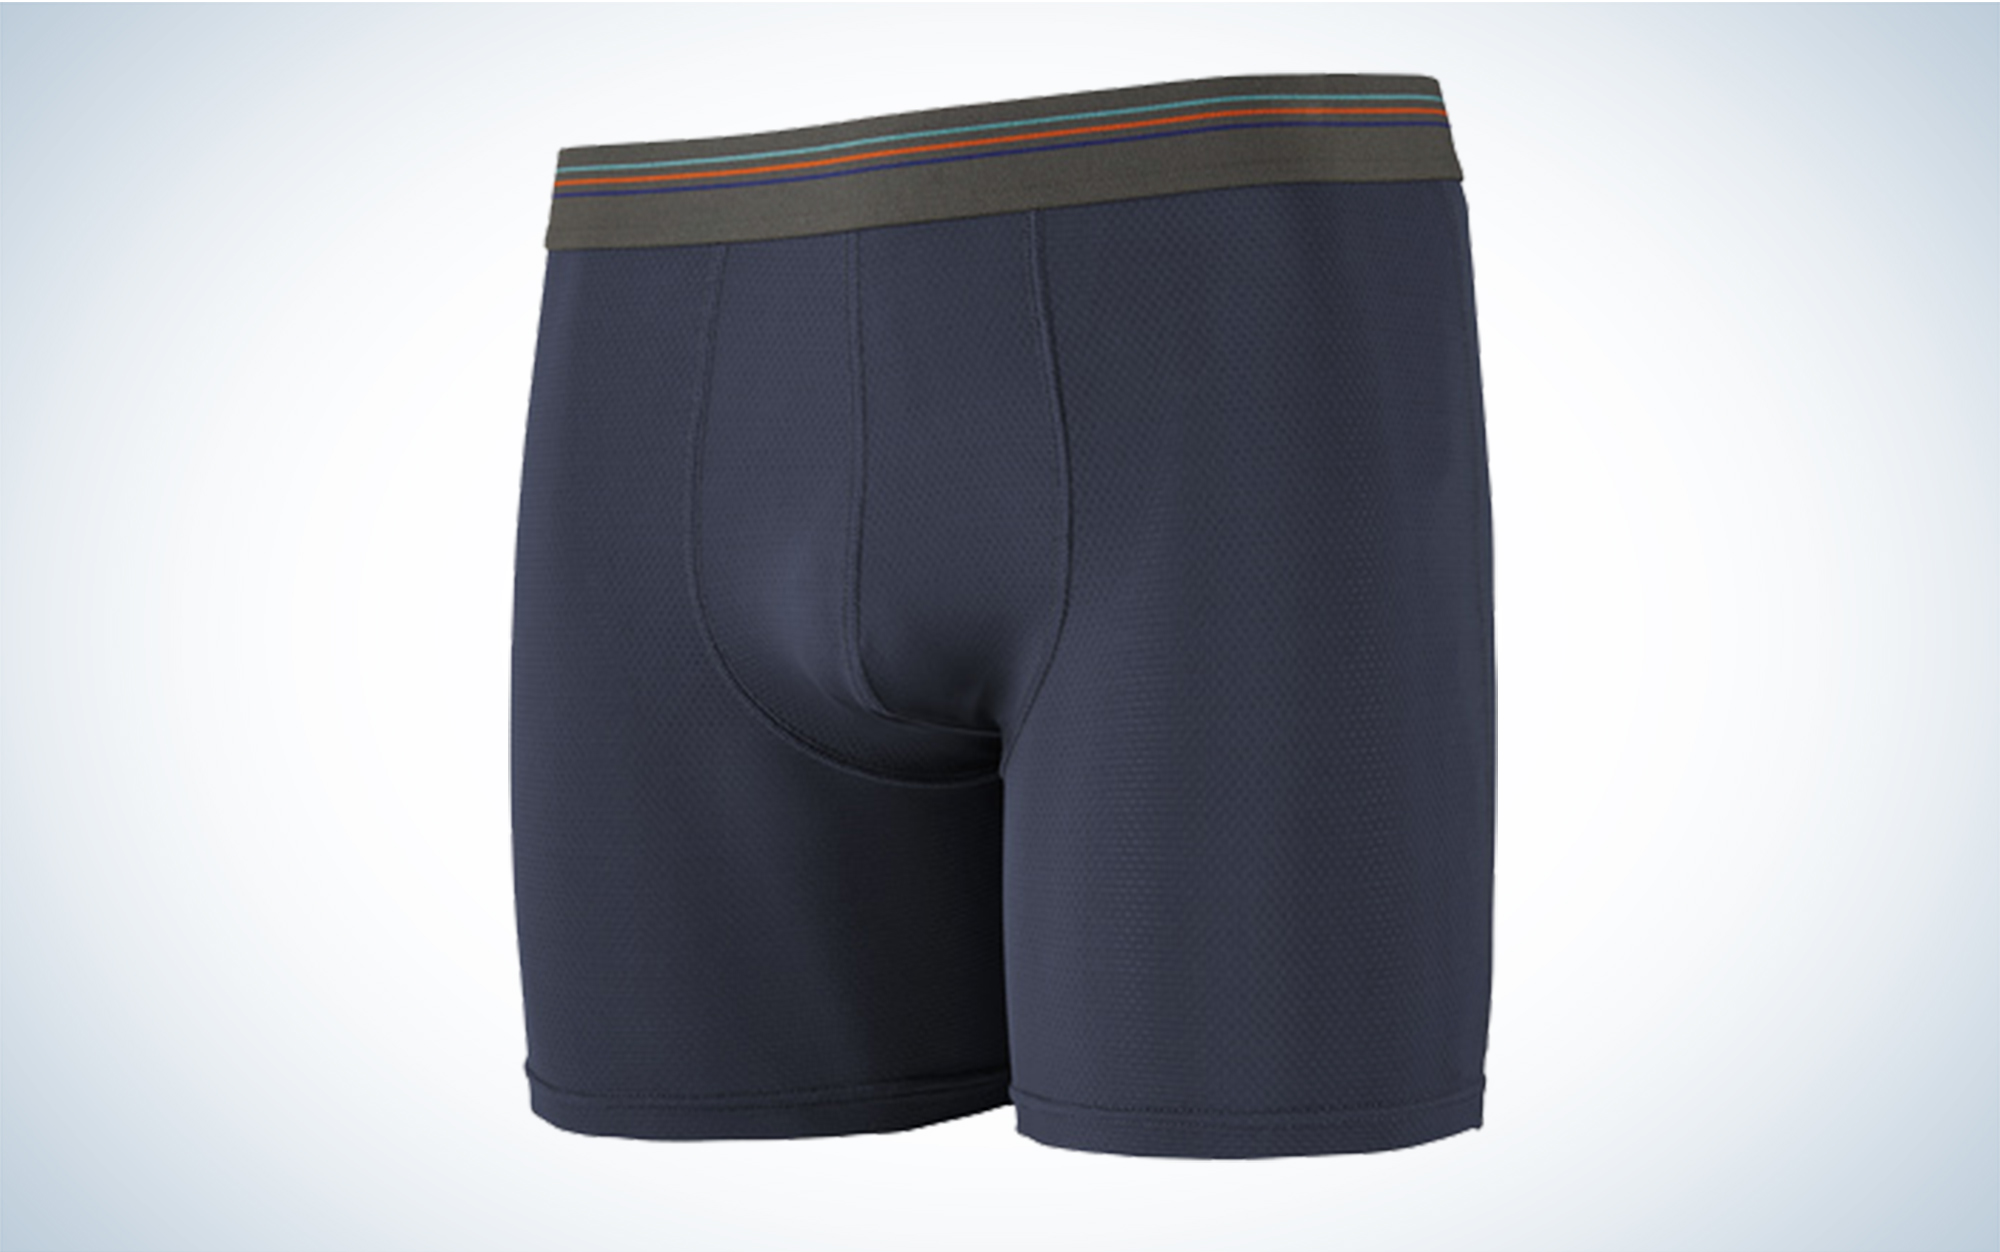 We tested the Patagonia Sender Boxer Briefs.